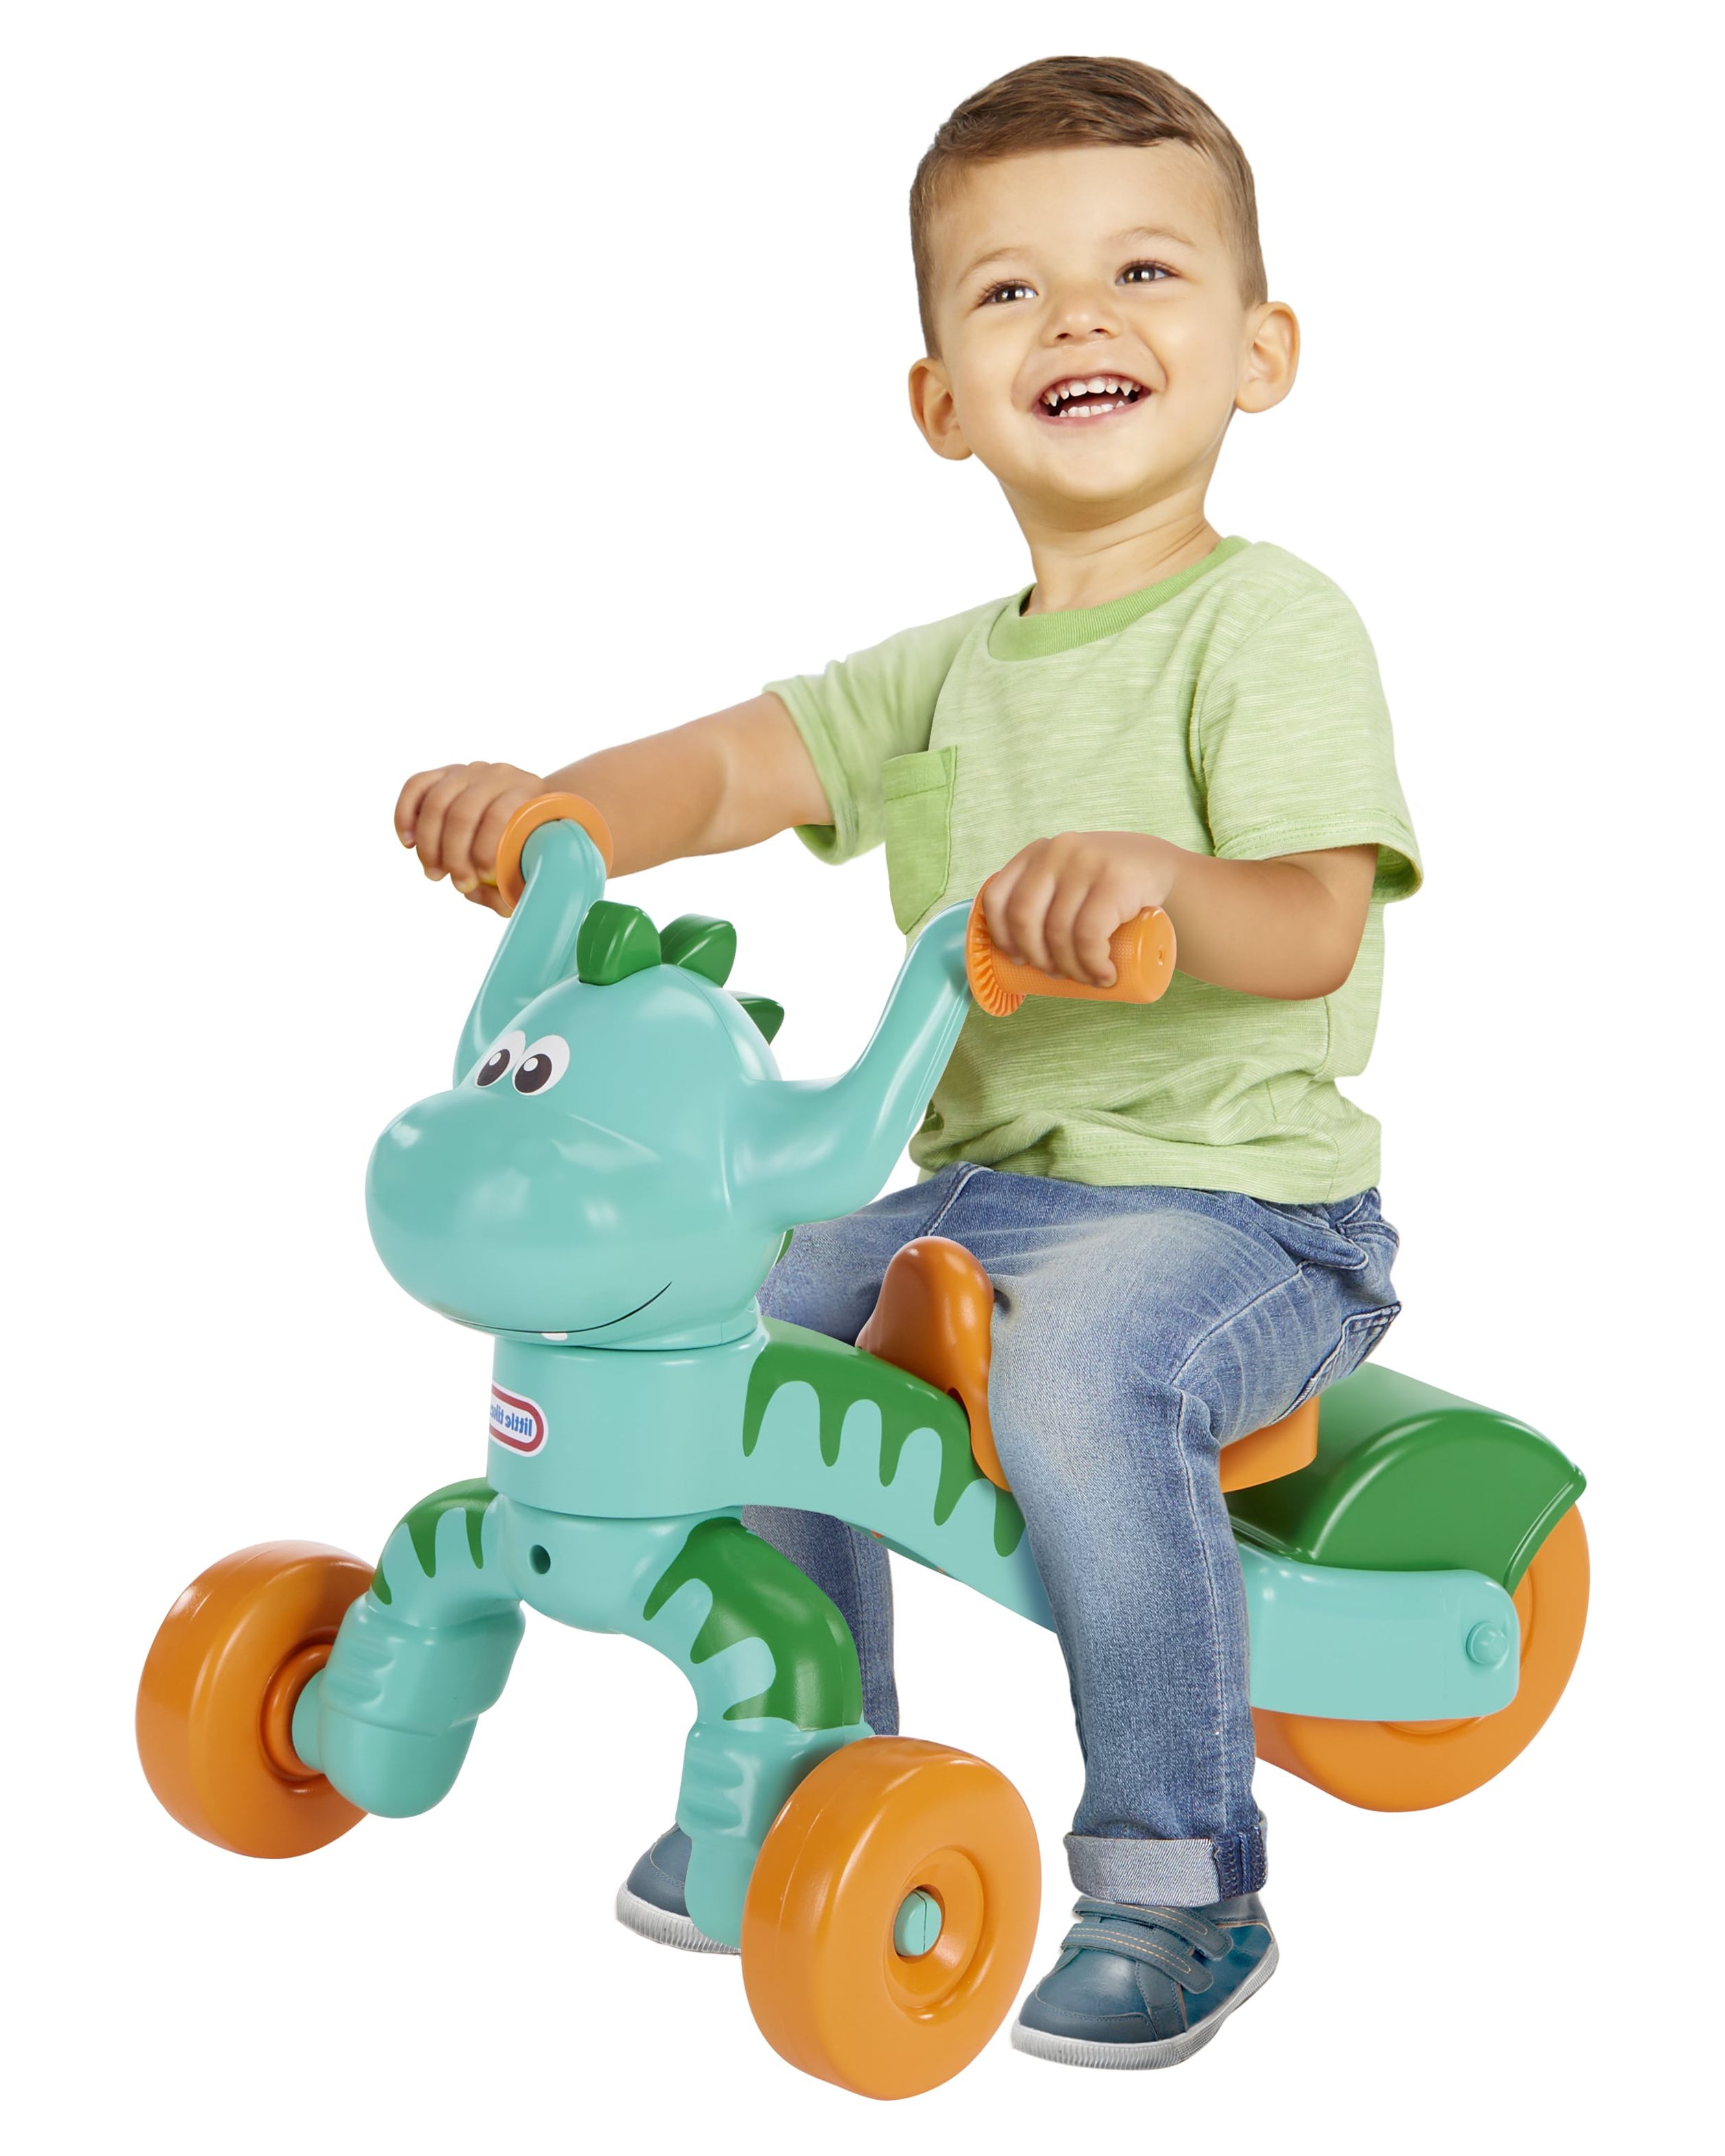 Little Tikes Go & Grow Dino Foot to Floor Dinosaur Tricycle for Toddlers Ride-on Toy, Kids Boys Girls Ages 12 Months to 3 Years - image 1 of 7